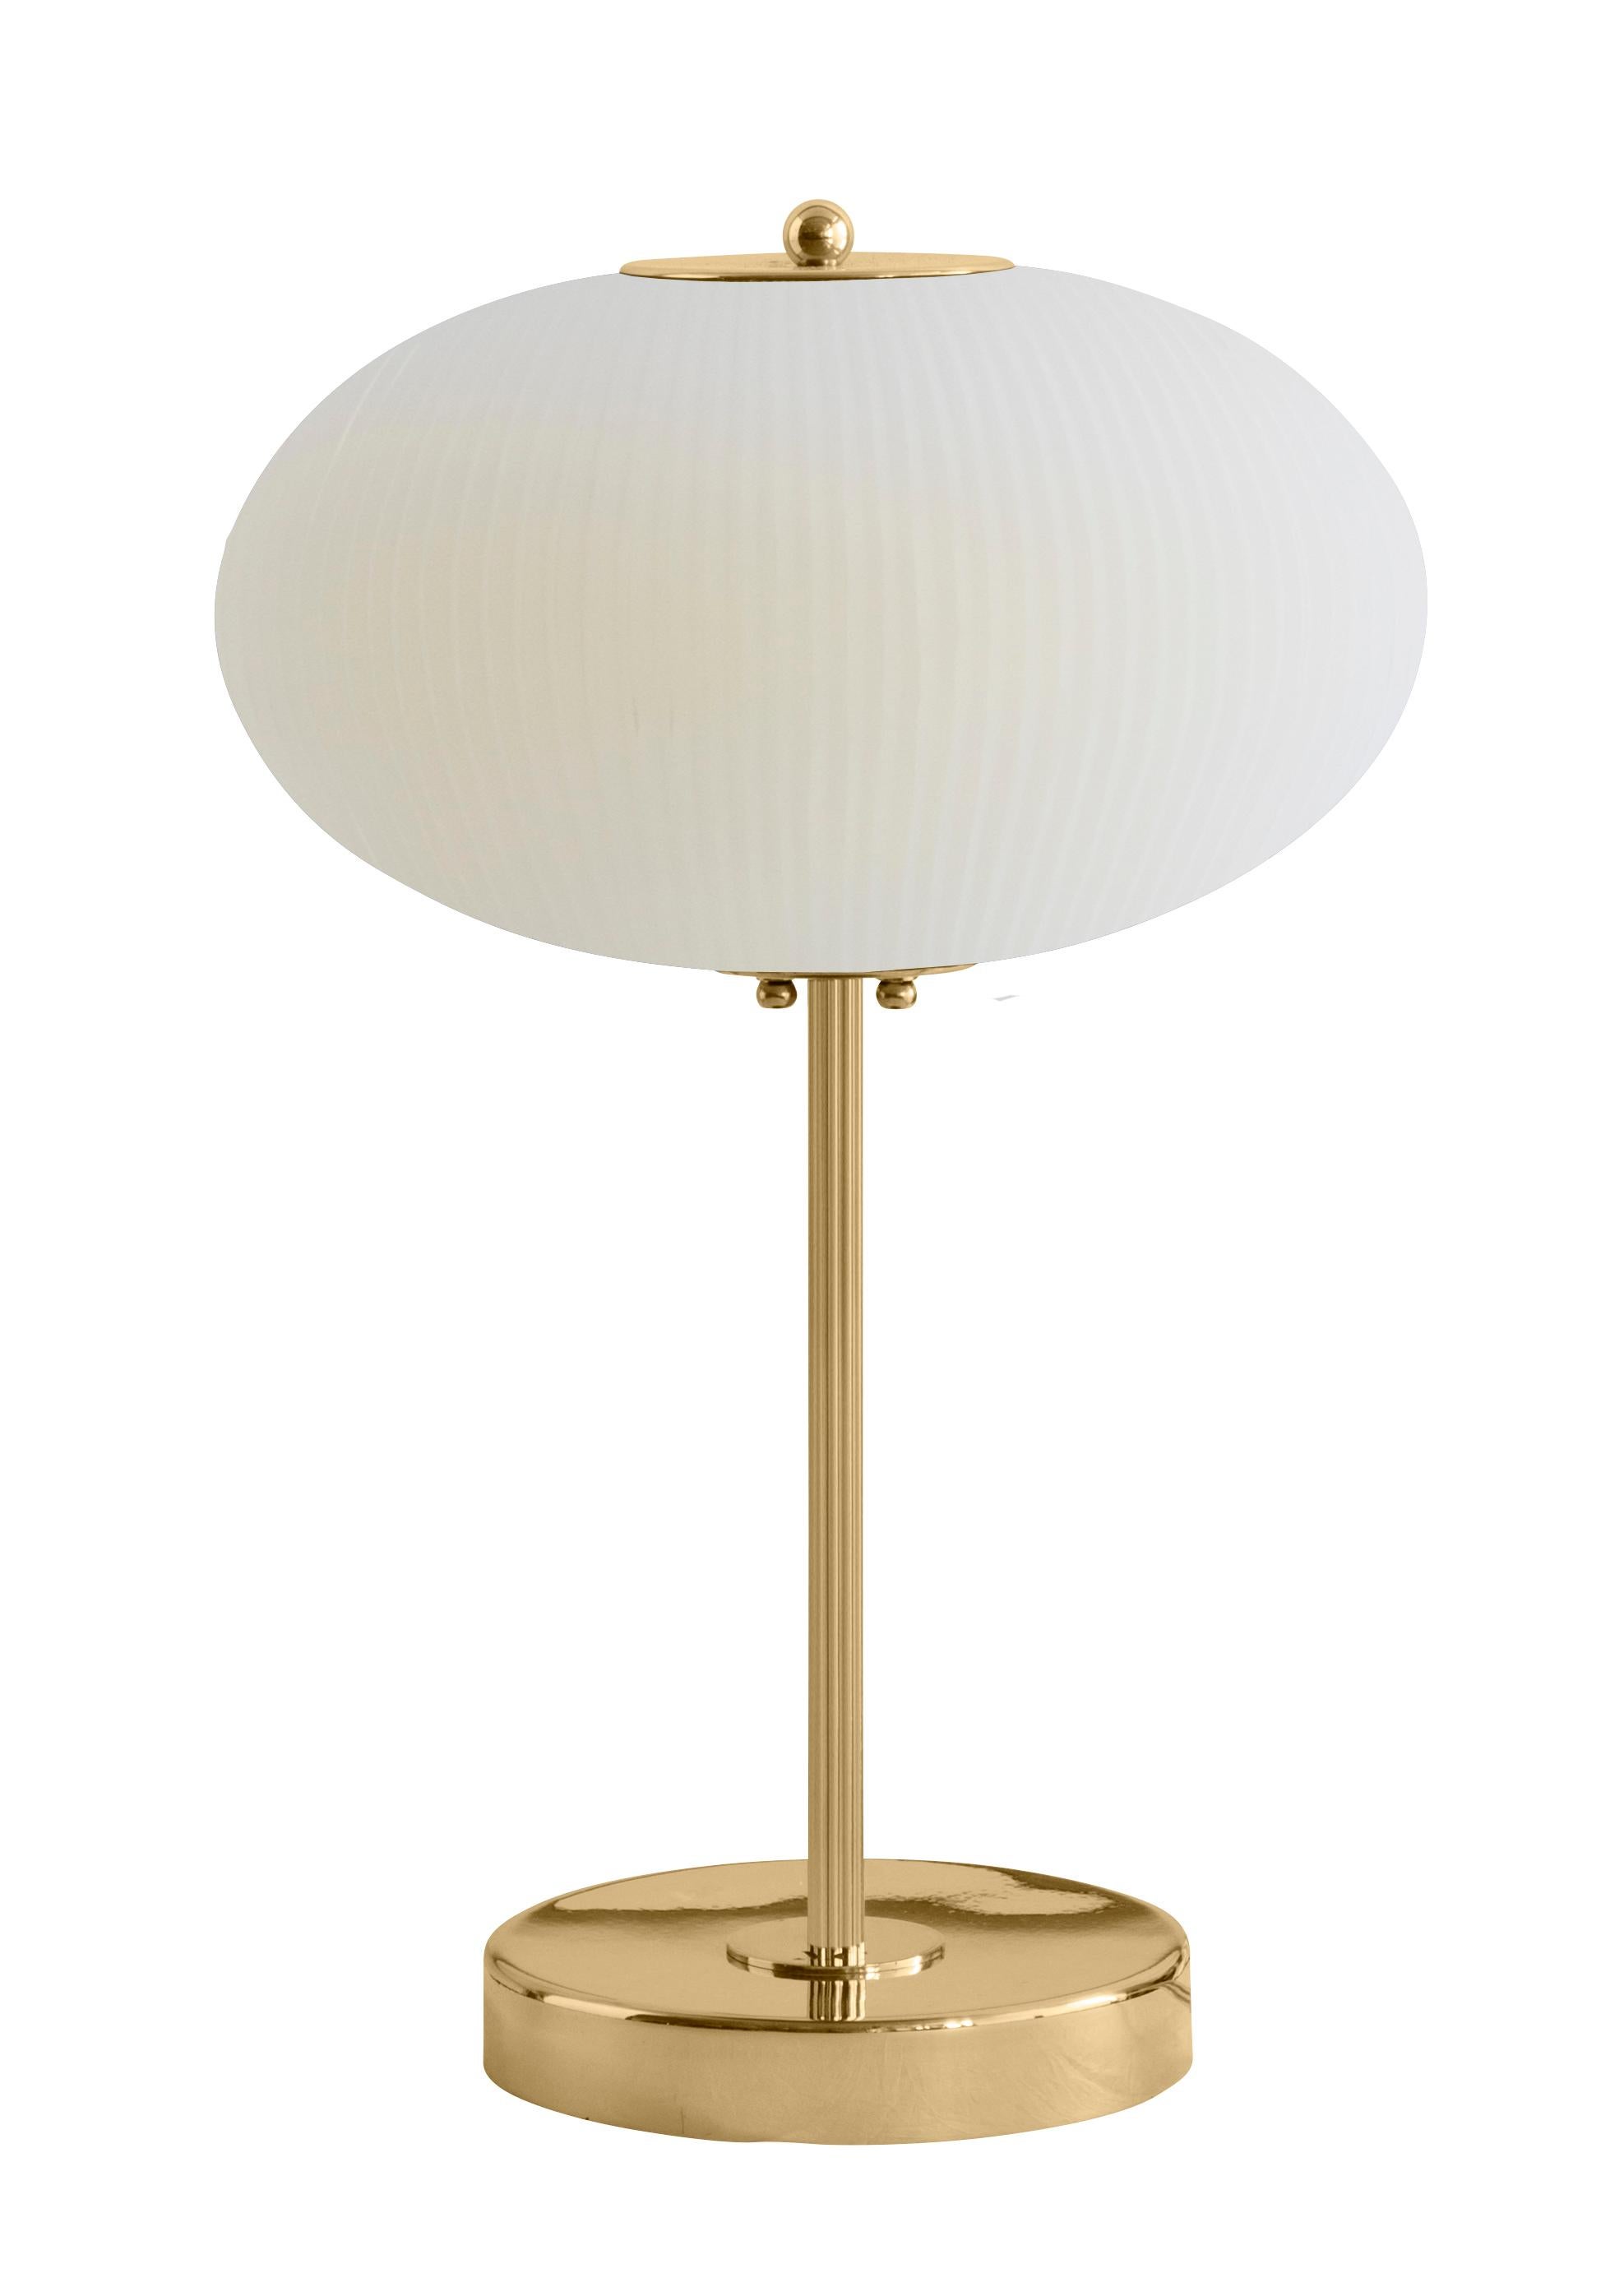 Table lamp china 07 by Magic Circus Editions.
Dimensions: H 50 x W 32 x D 32 cm.
Materials: brass, mouth blown glass sculpted with a diamond saw.
Colour: enamel soft white.

Available finishes: brass, nickel.
Available colours: enamel soft